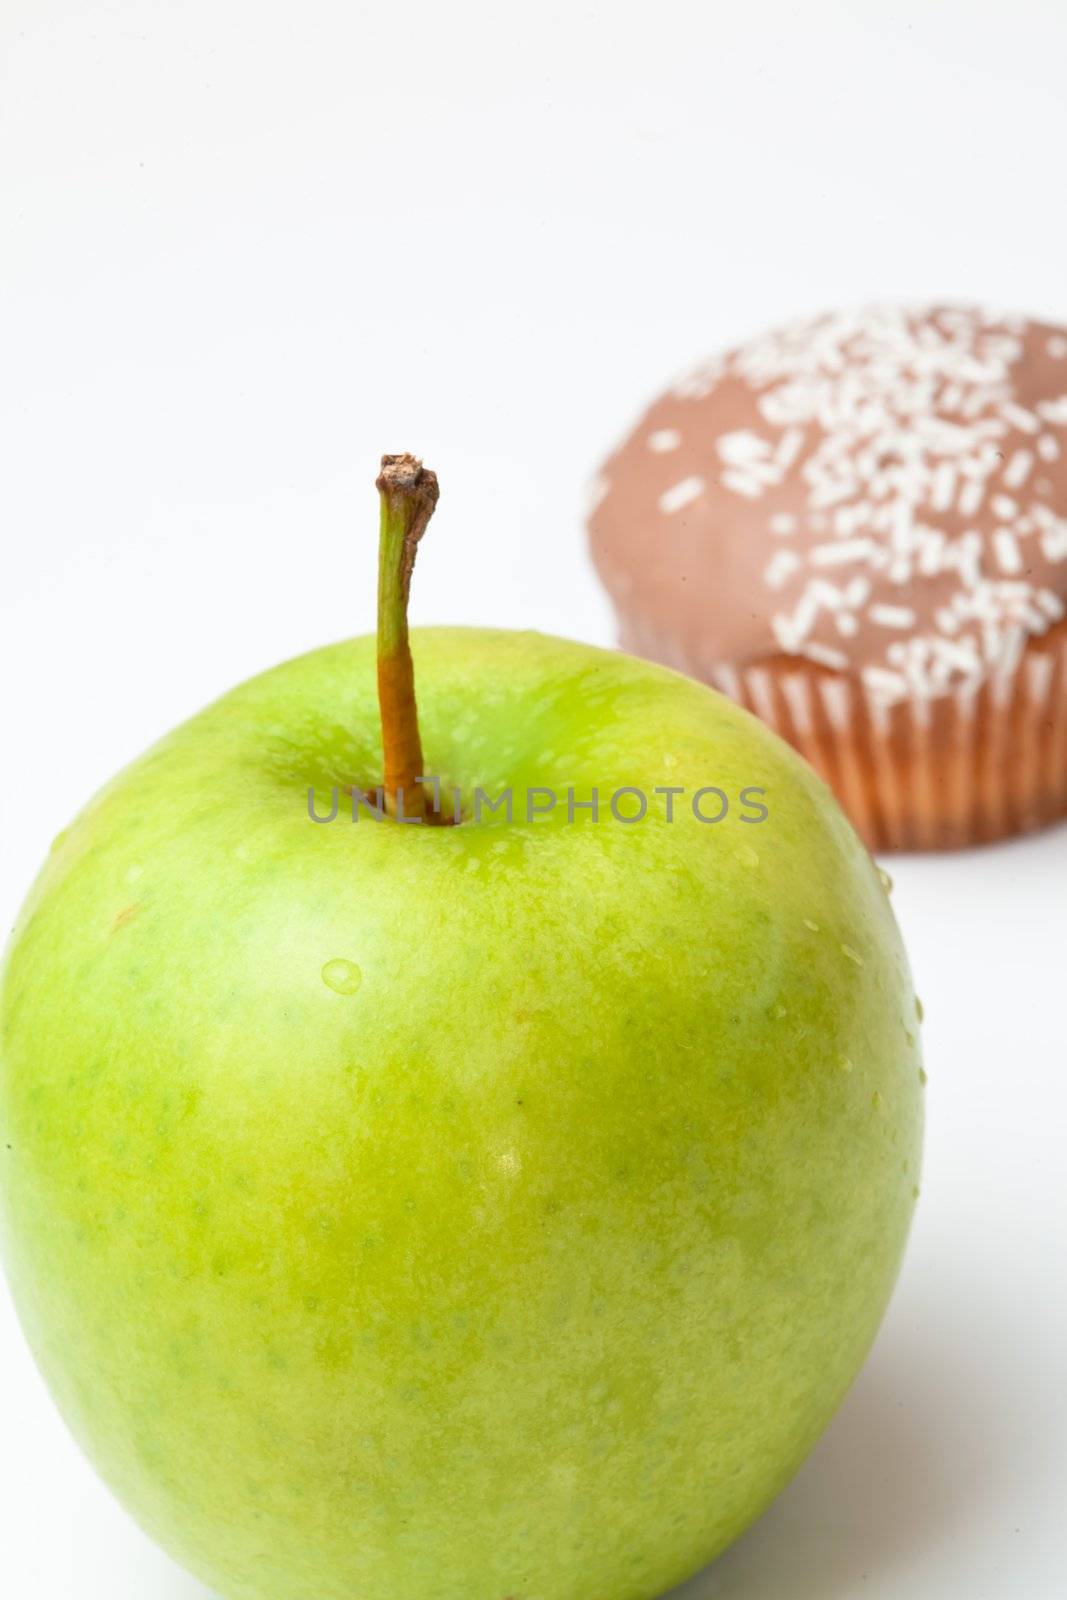 Muffin and apple against a white background